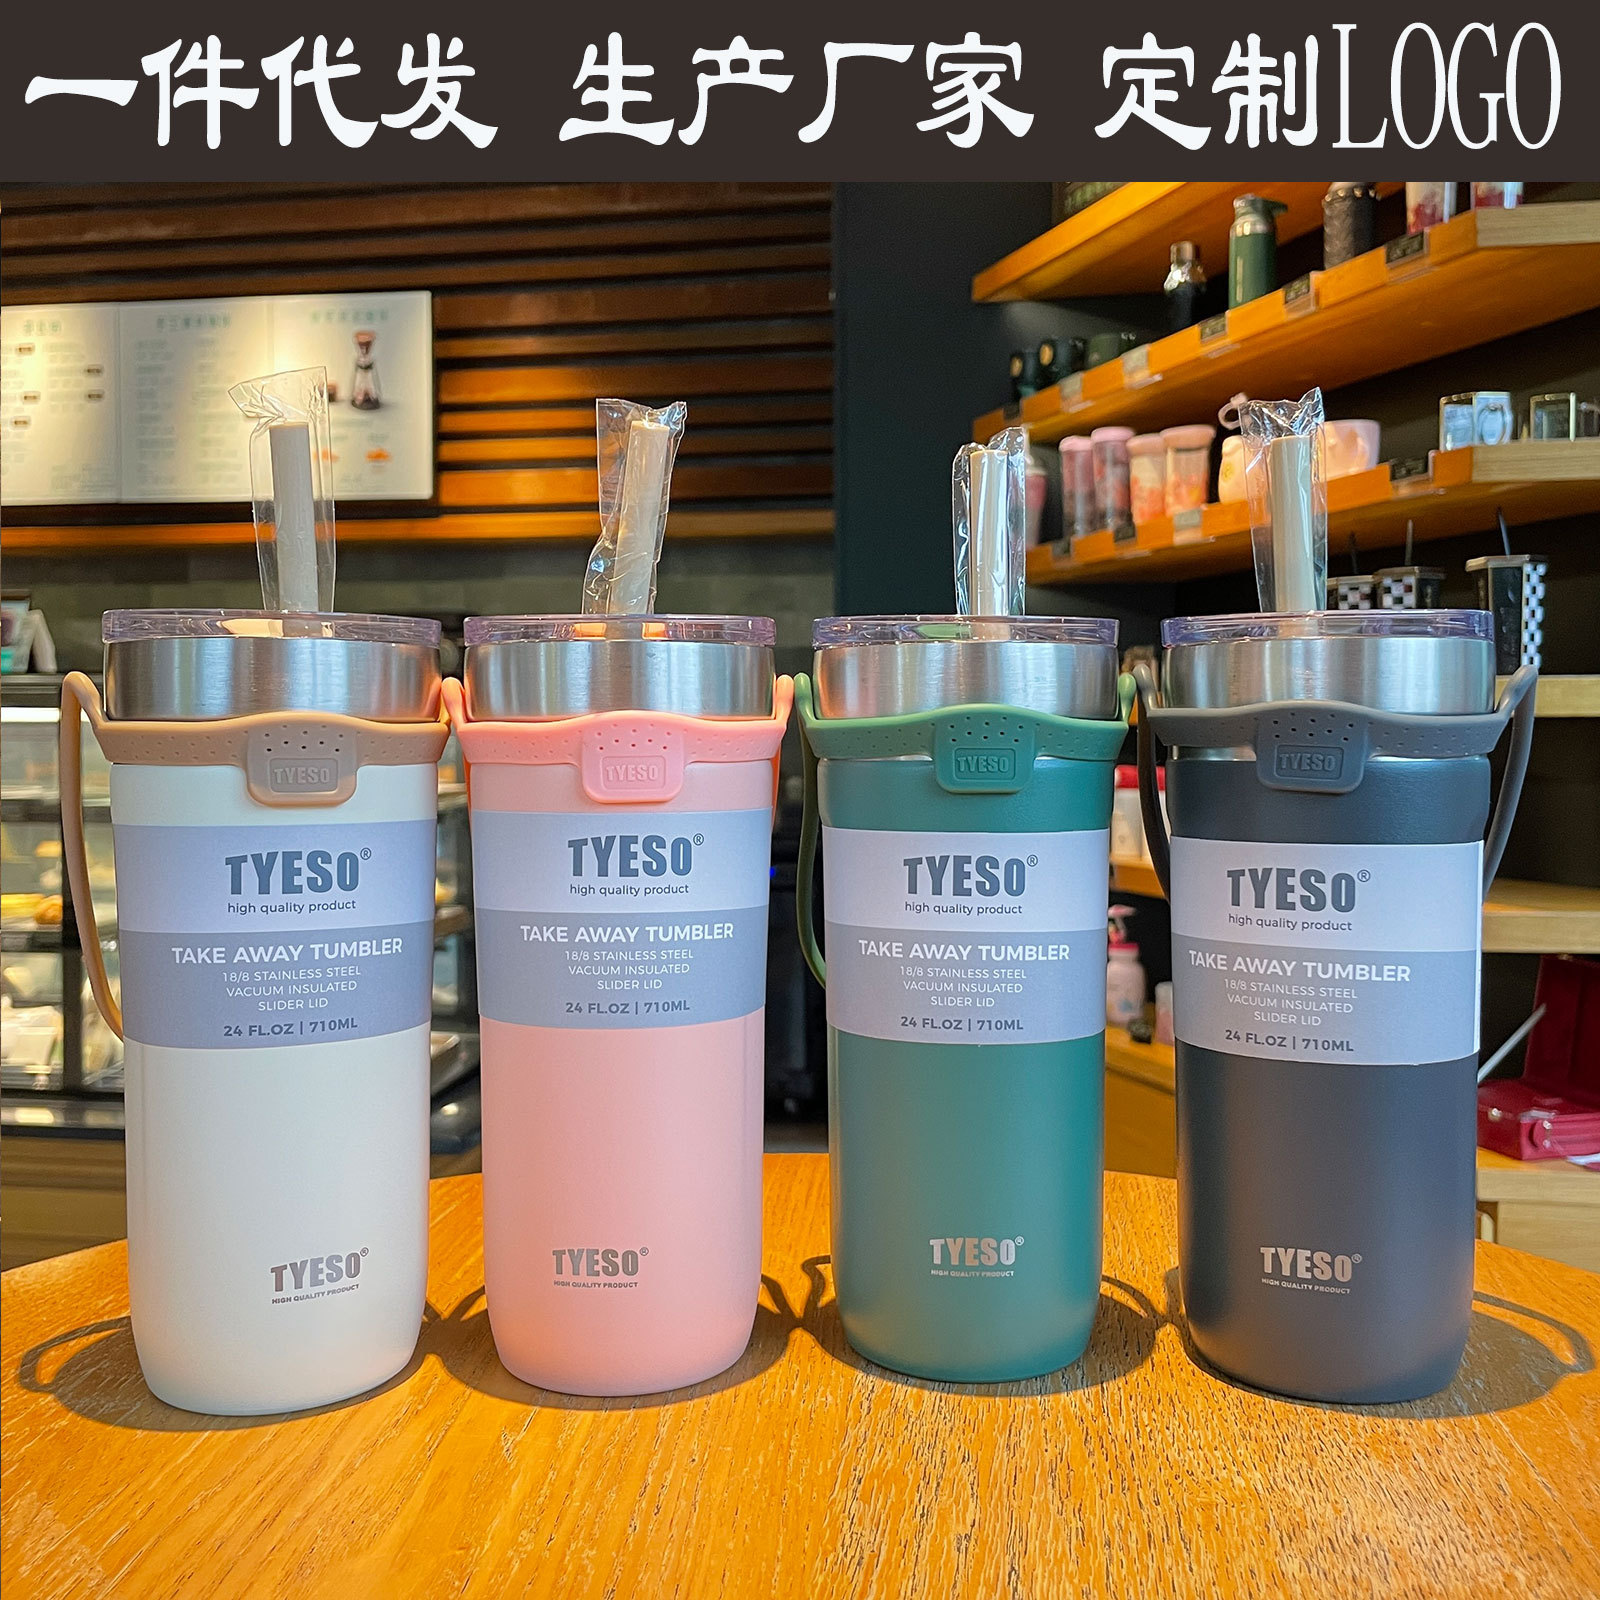 Large Ice Cup Large Capacity Stainless Steel Vacuum Cup Mug Coffee Cup Car Silicone Portable Straw Bottle